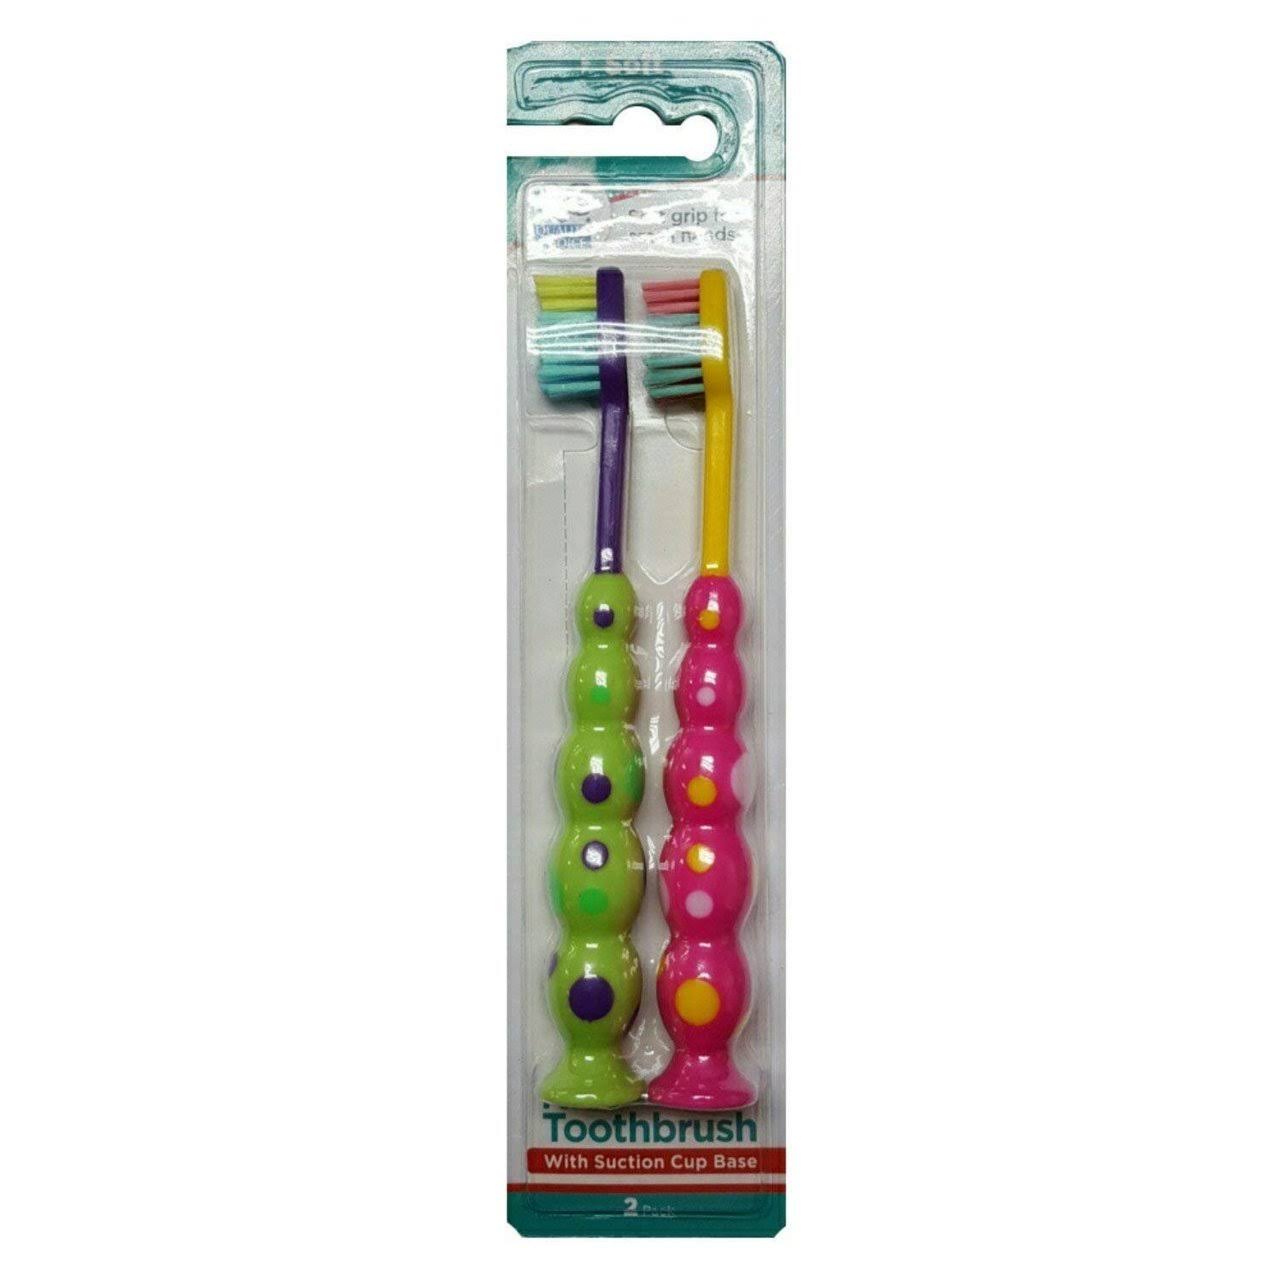 Quality Choice Kids Bubbles Toothbrush - Soft Grip, 2ct